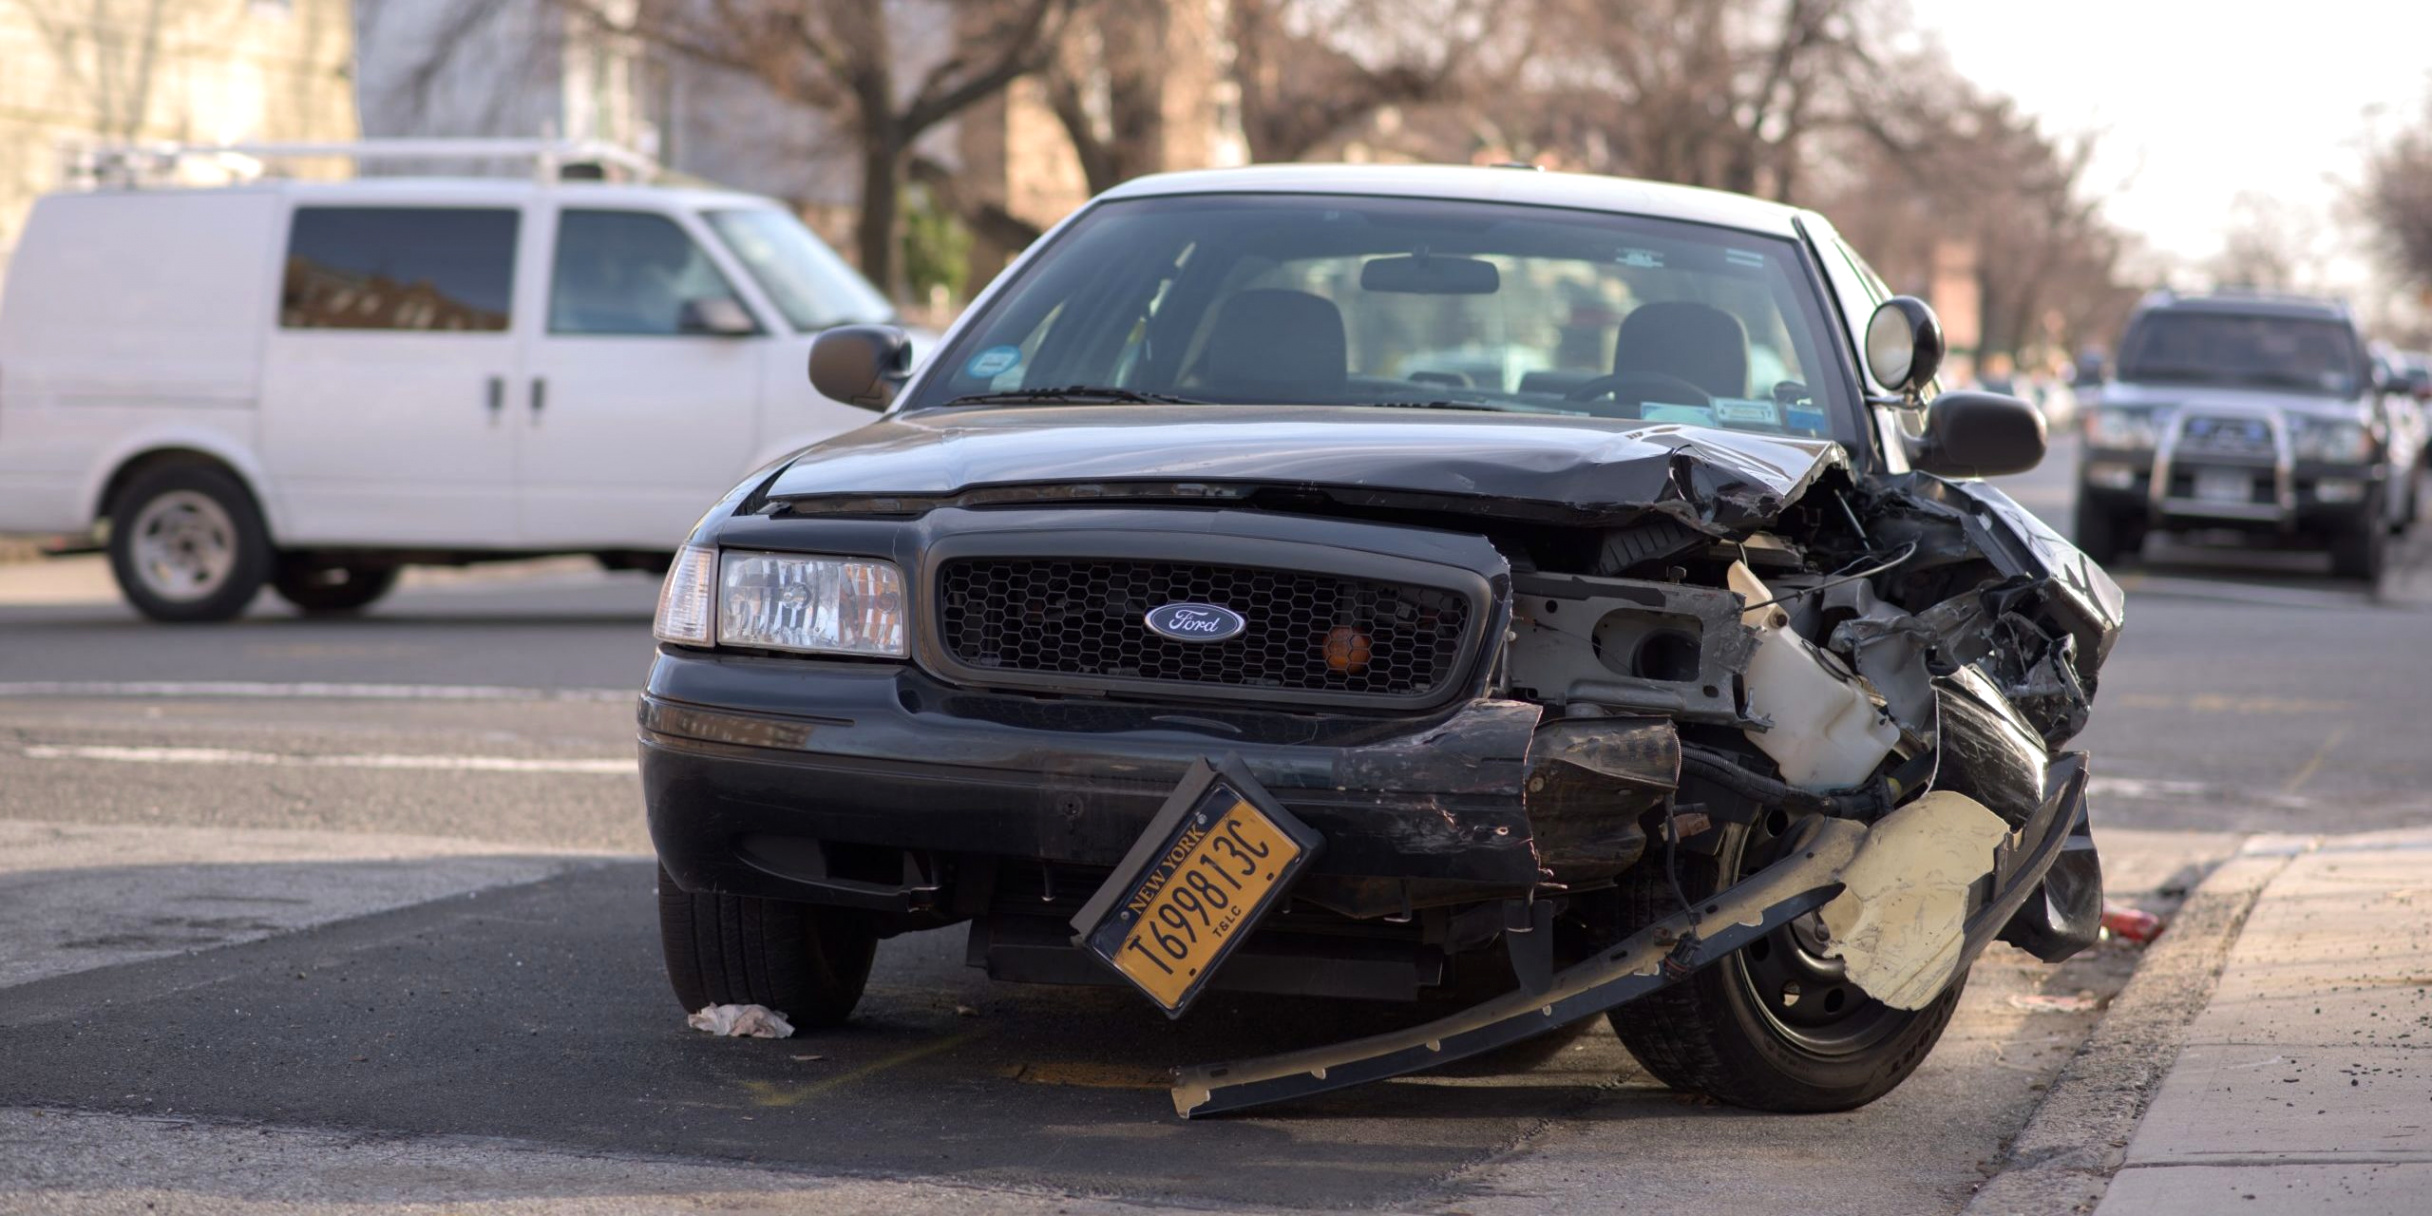 when should i contact an attorney after a car accident